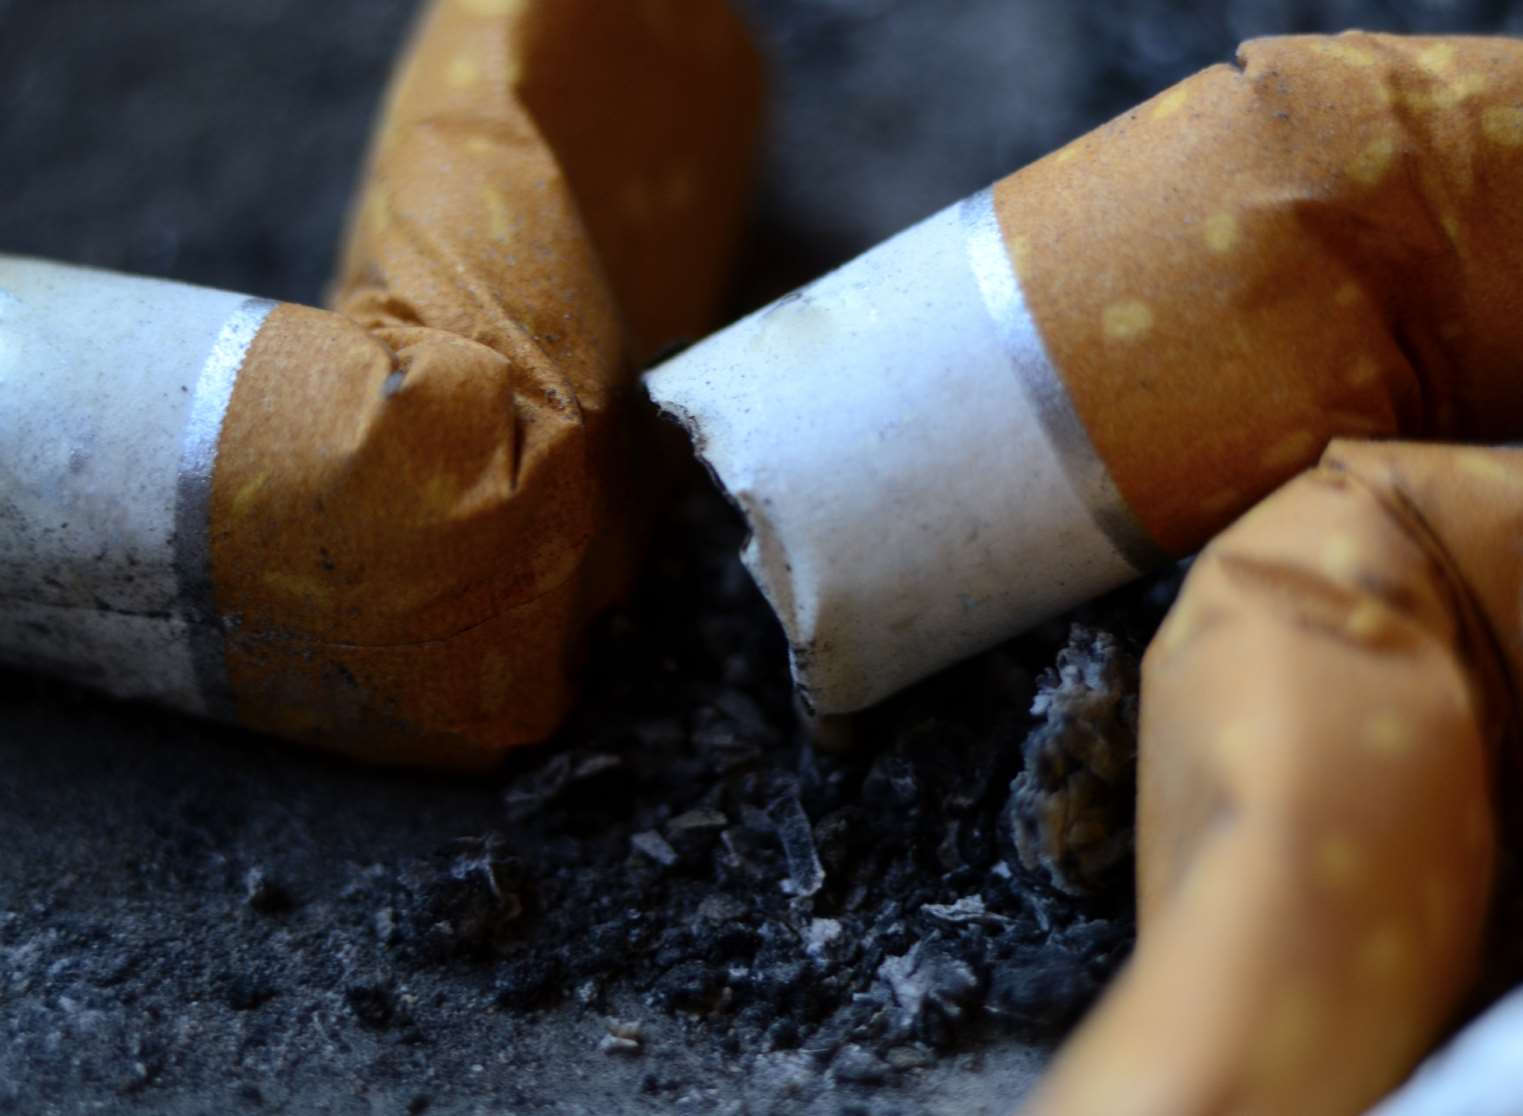 Smoking could be banned from school gates